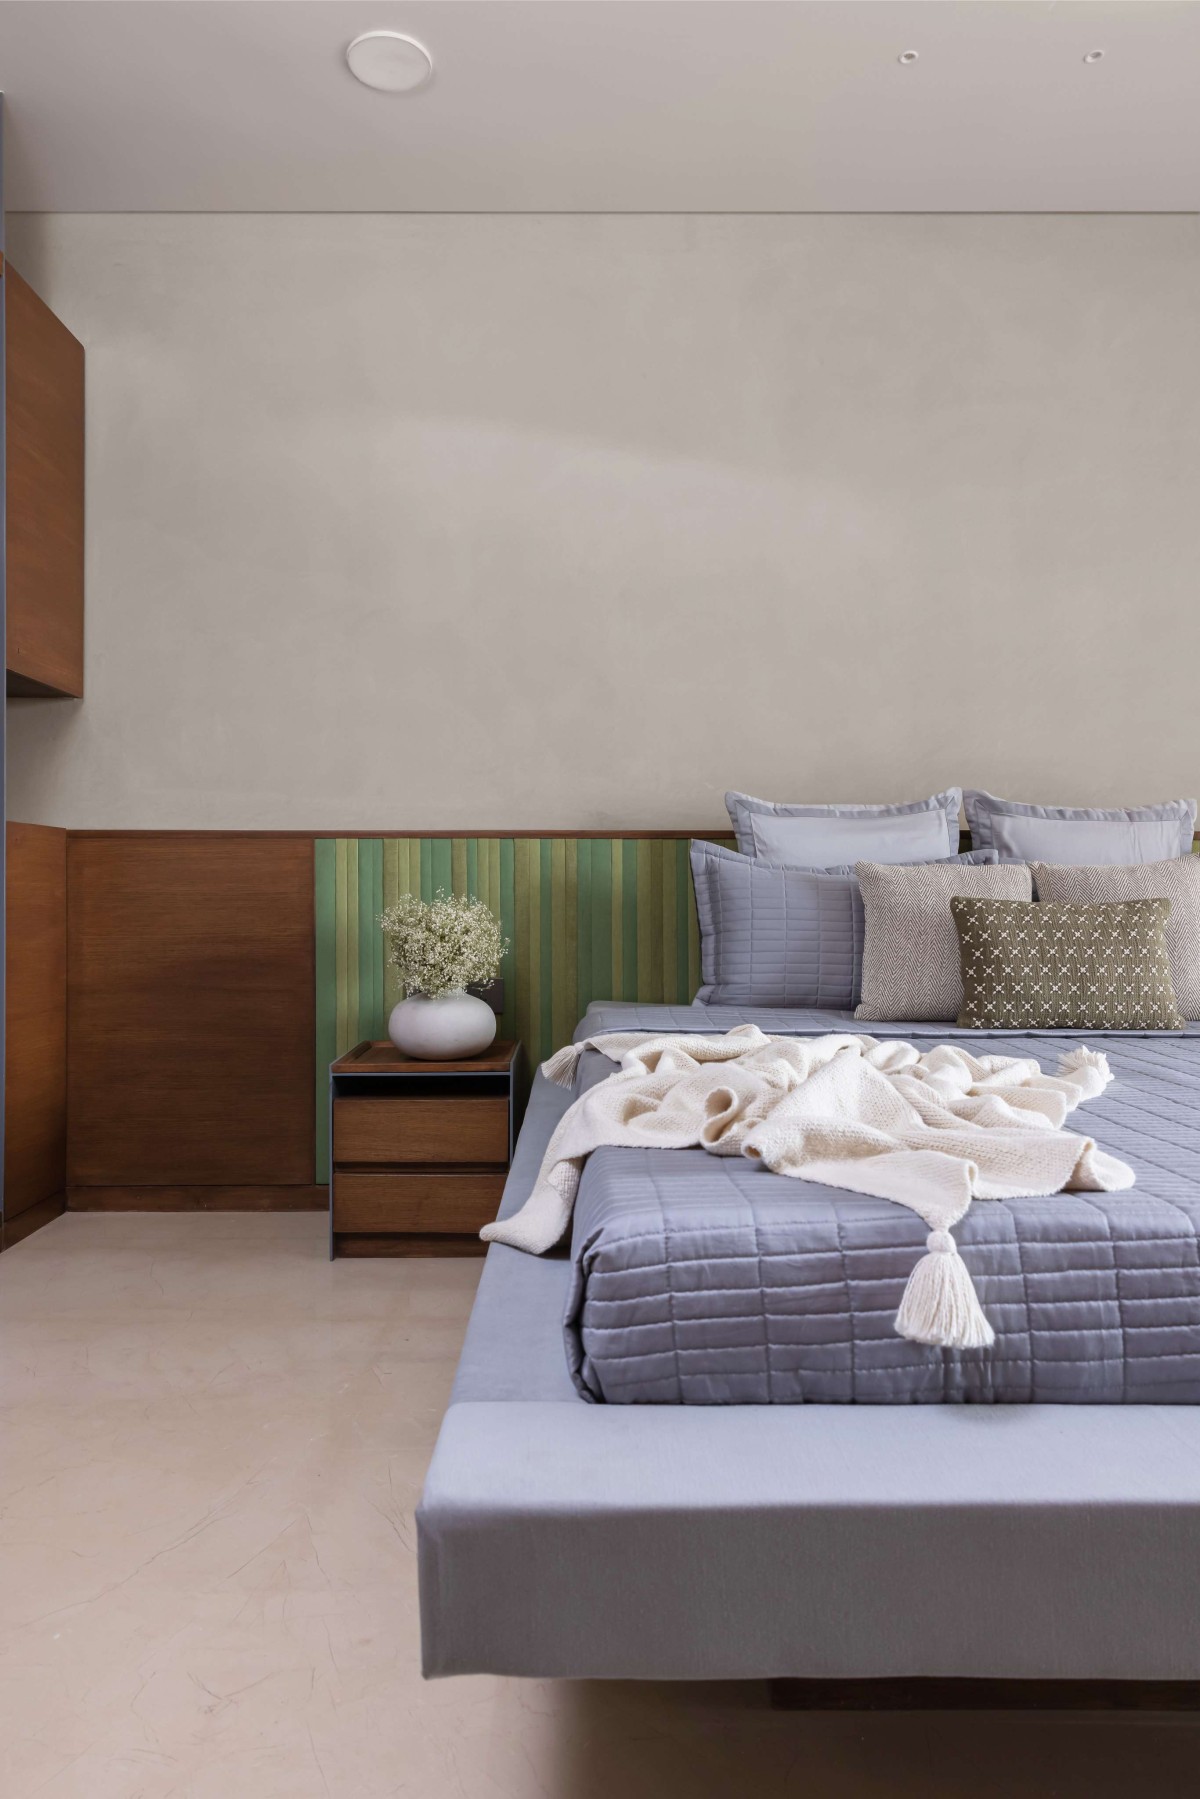 Bedroom of House of Linens and Lime by Aakar Ajwani Architects